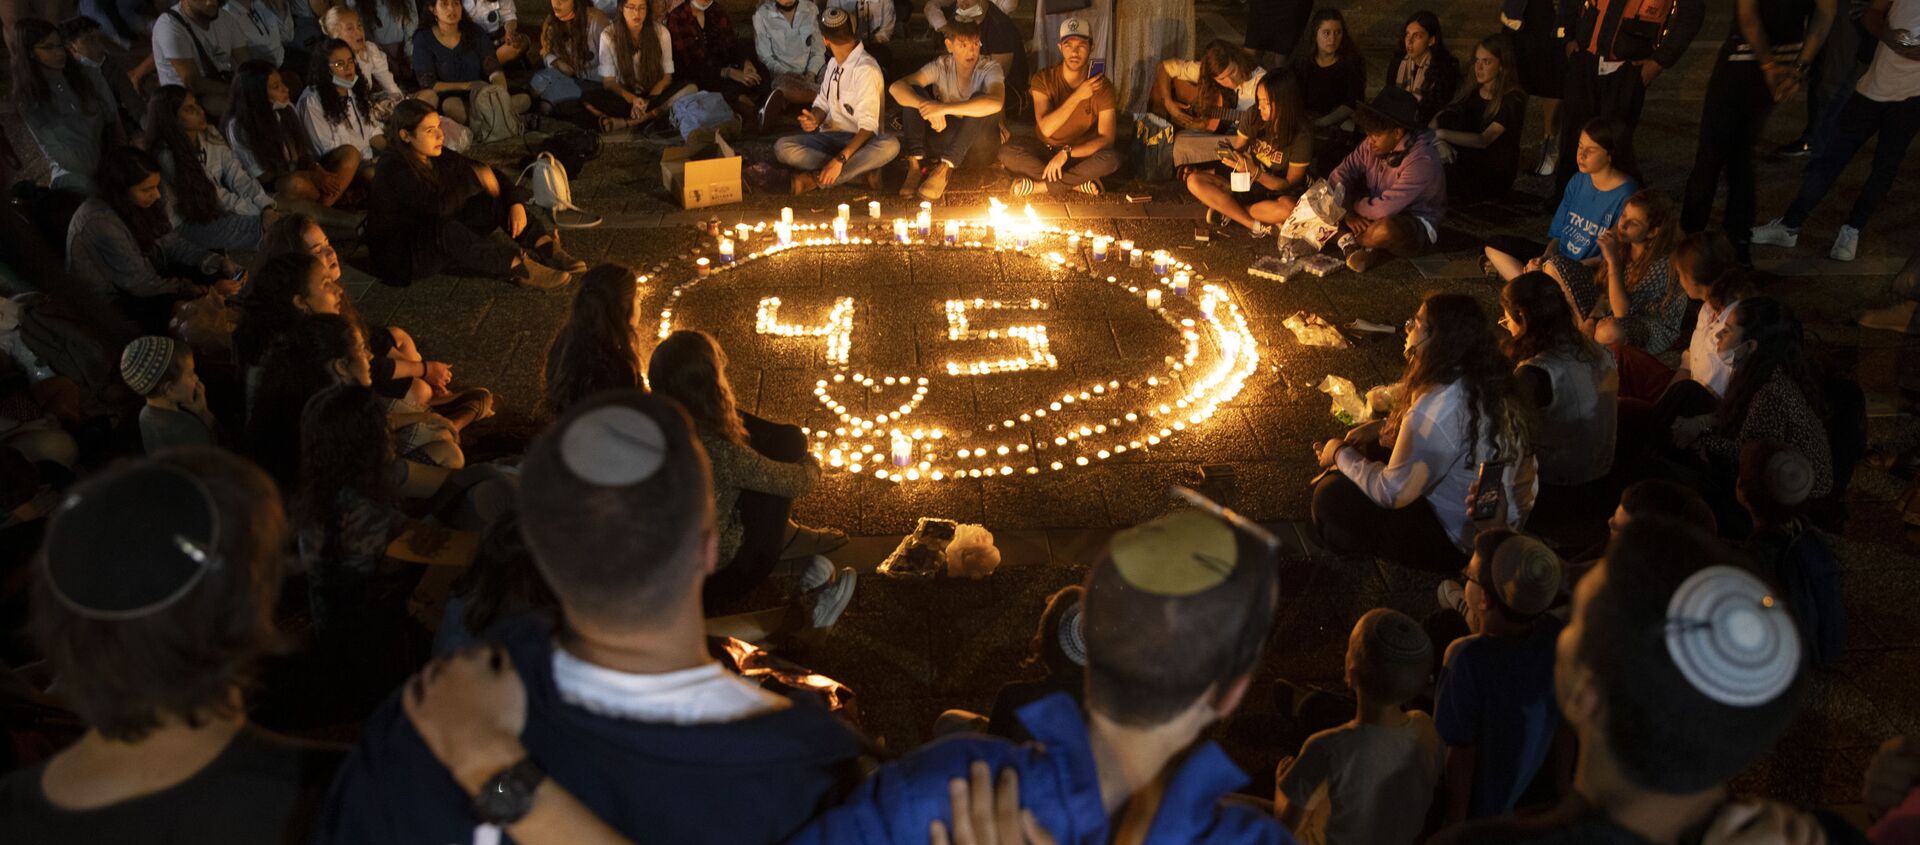 People gather around candles during a vigil in memory of the 45 ultra-Orthodox Jews killed in a stampede at a religious festival in northern Israel on Friday, in Tel Aviv, Israel, Sunday, 2 May 2021.  - Sputnik International, 1920, 30.05.2021